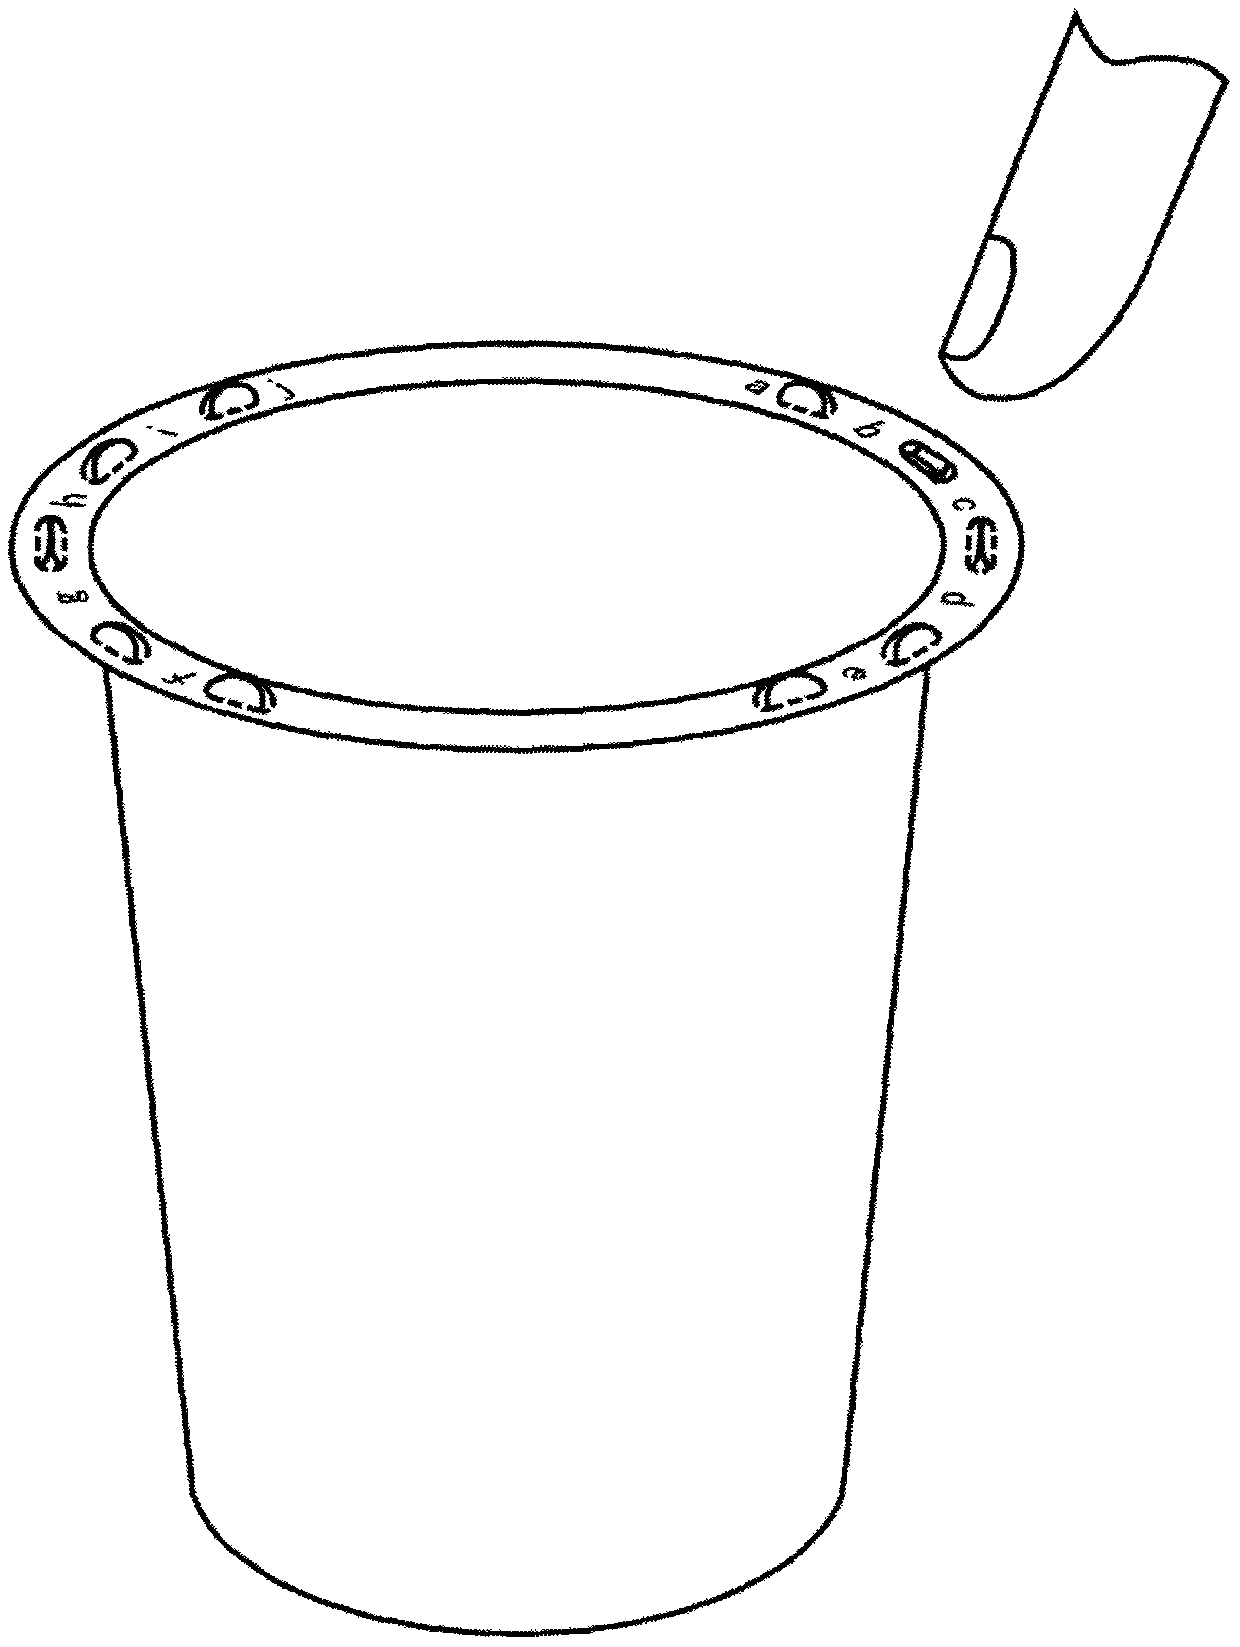 Method for identifying plastic cup and plastic bowl